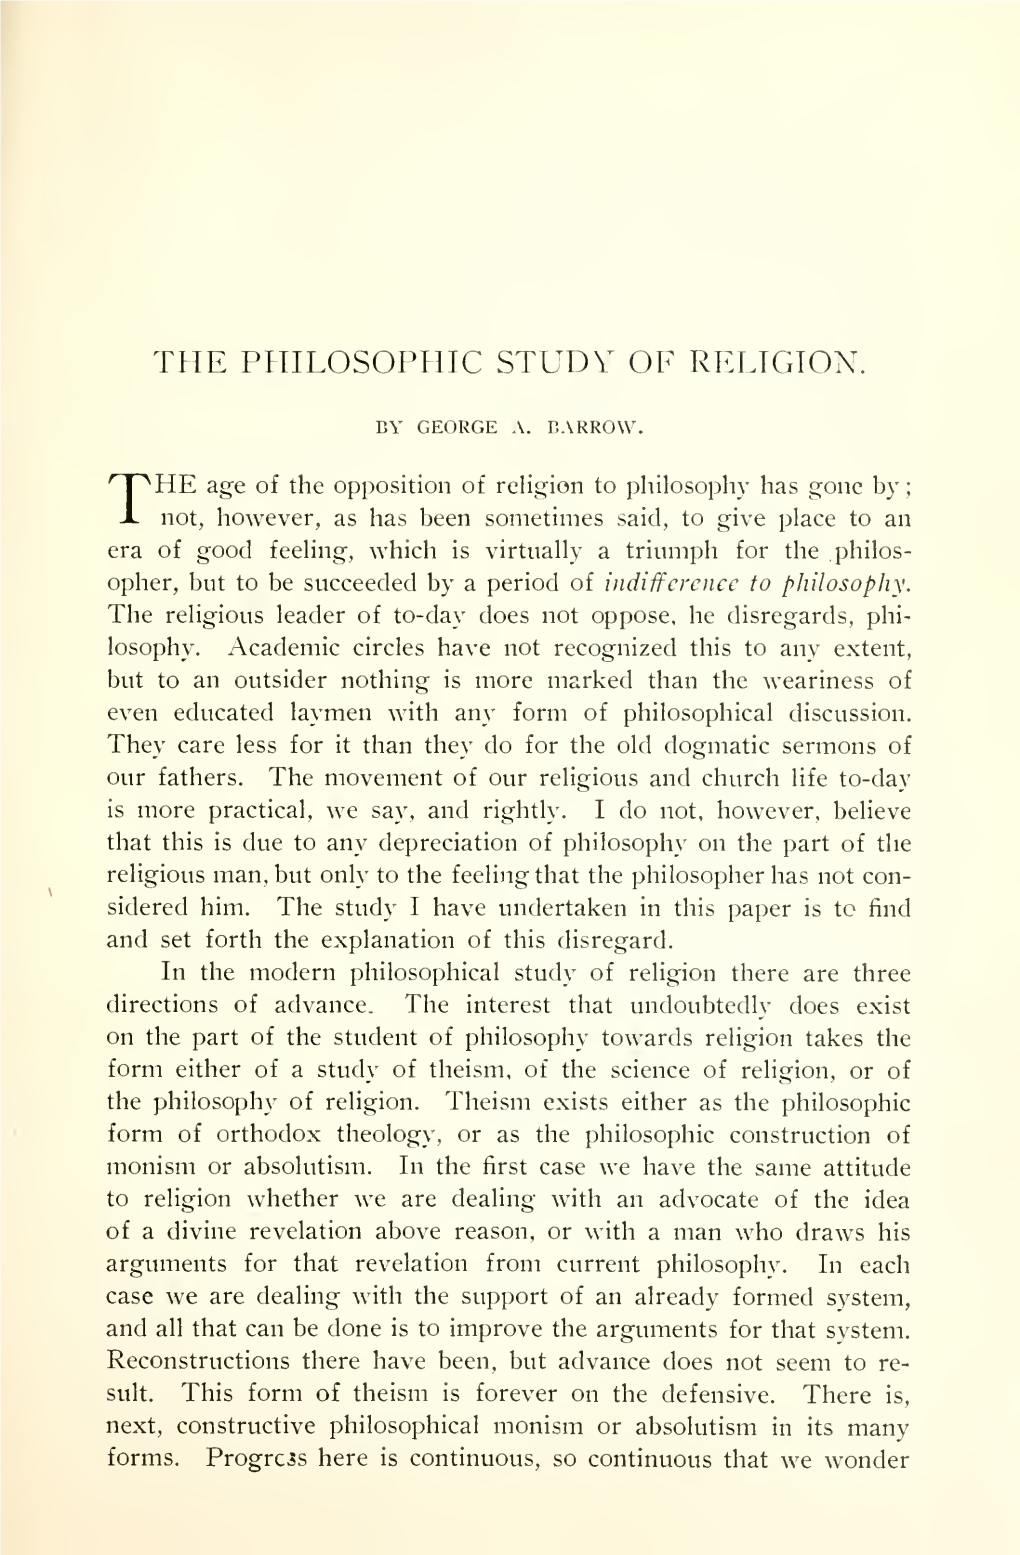 The Philosophic Study of Religion (With Editorial